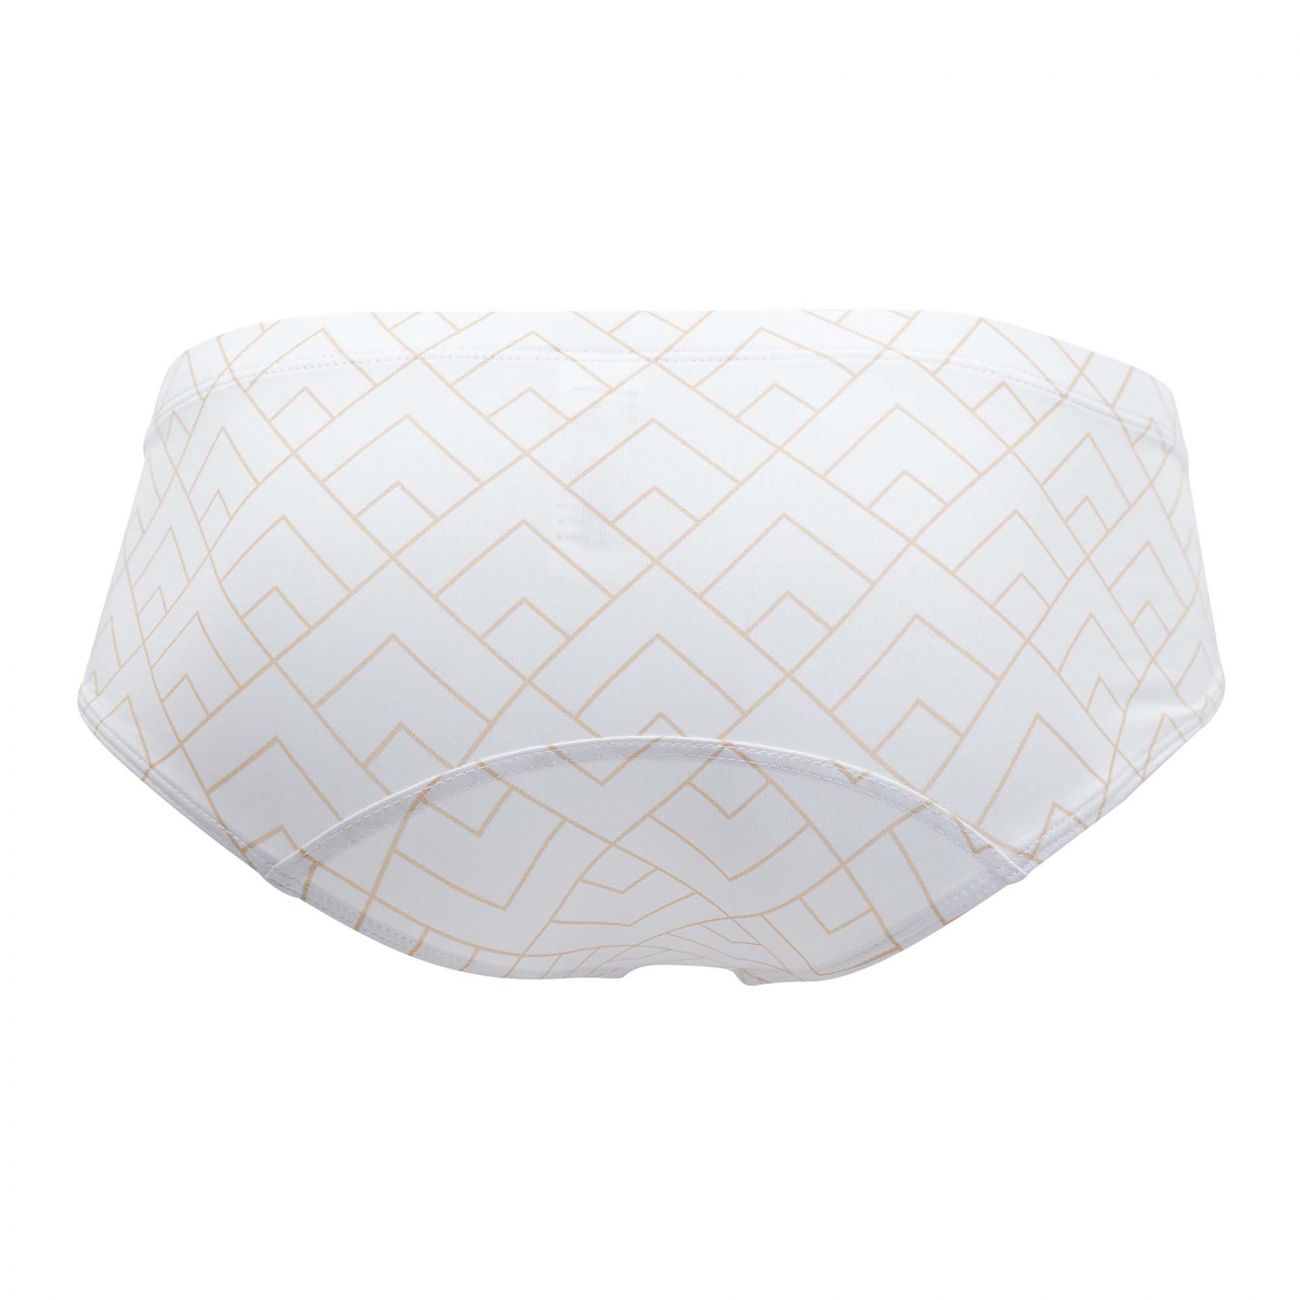 Clever 0907 Opal Briefs White